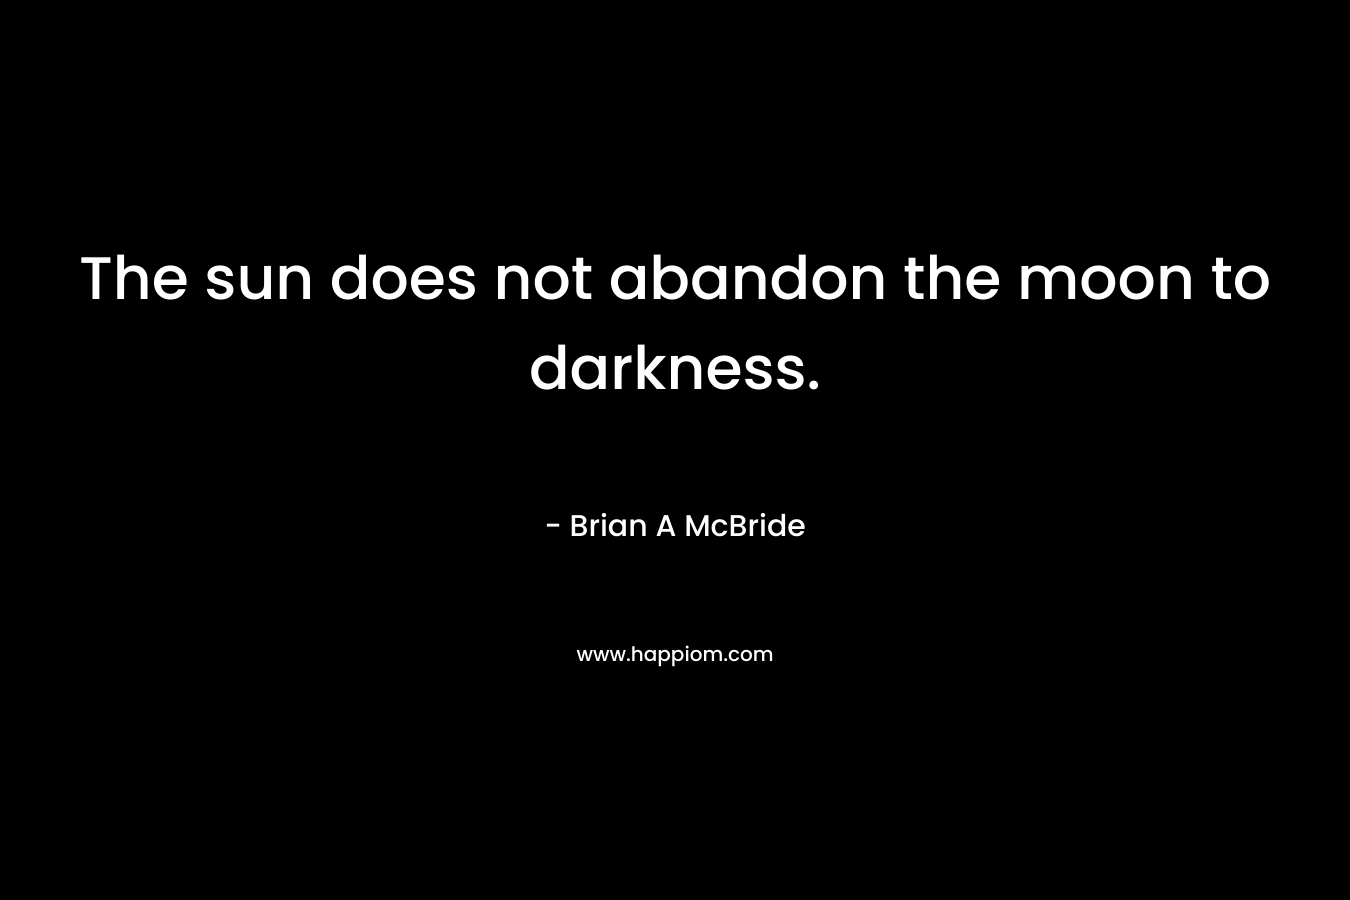 The sun does not abandon the moon to darkness.